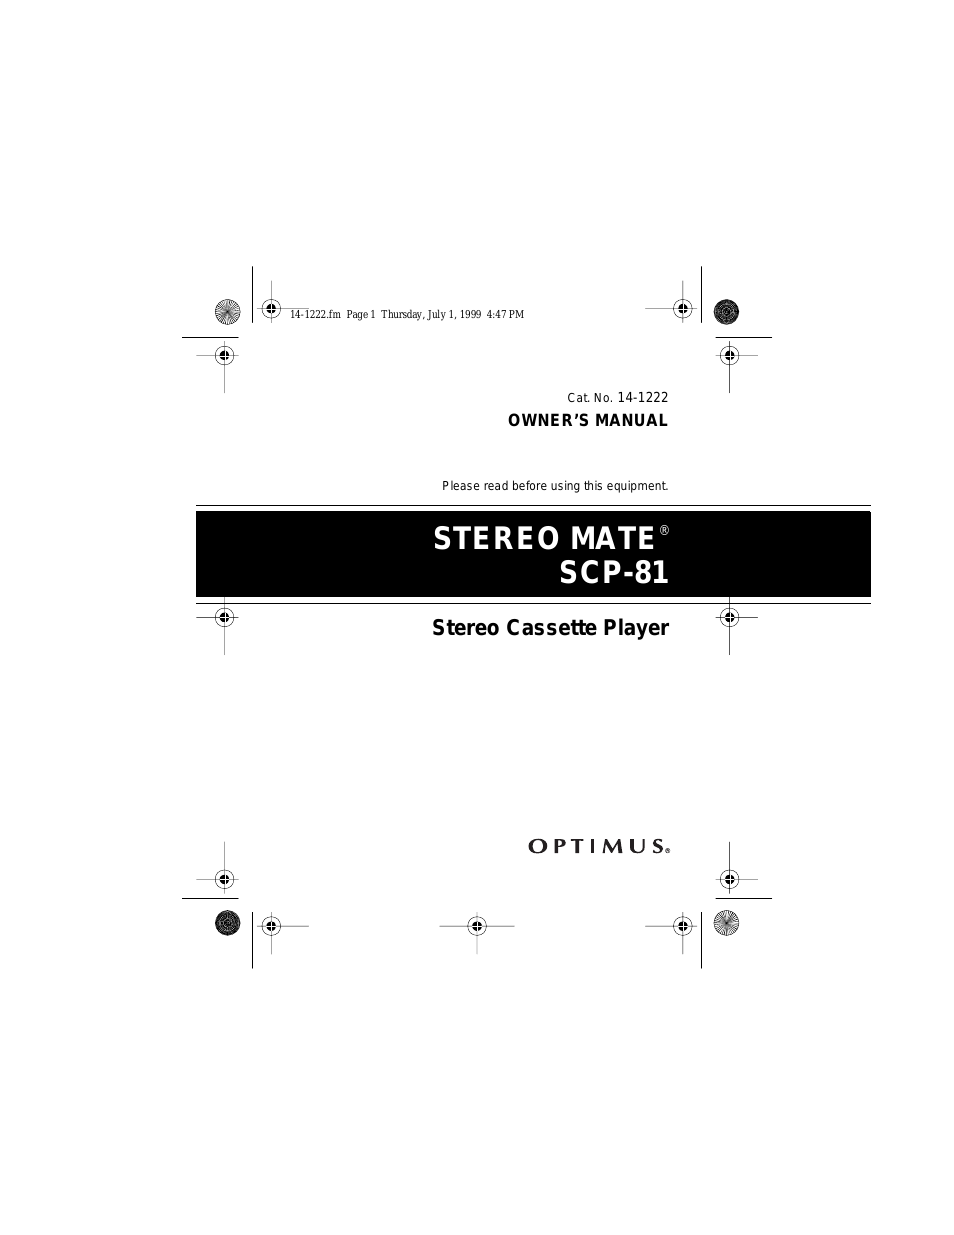 STEREO MATE SCP-81